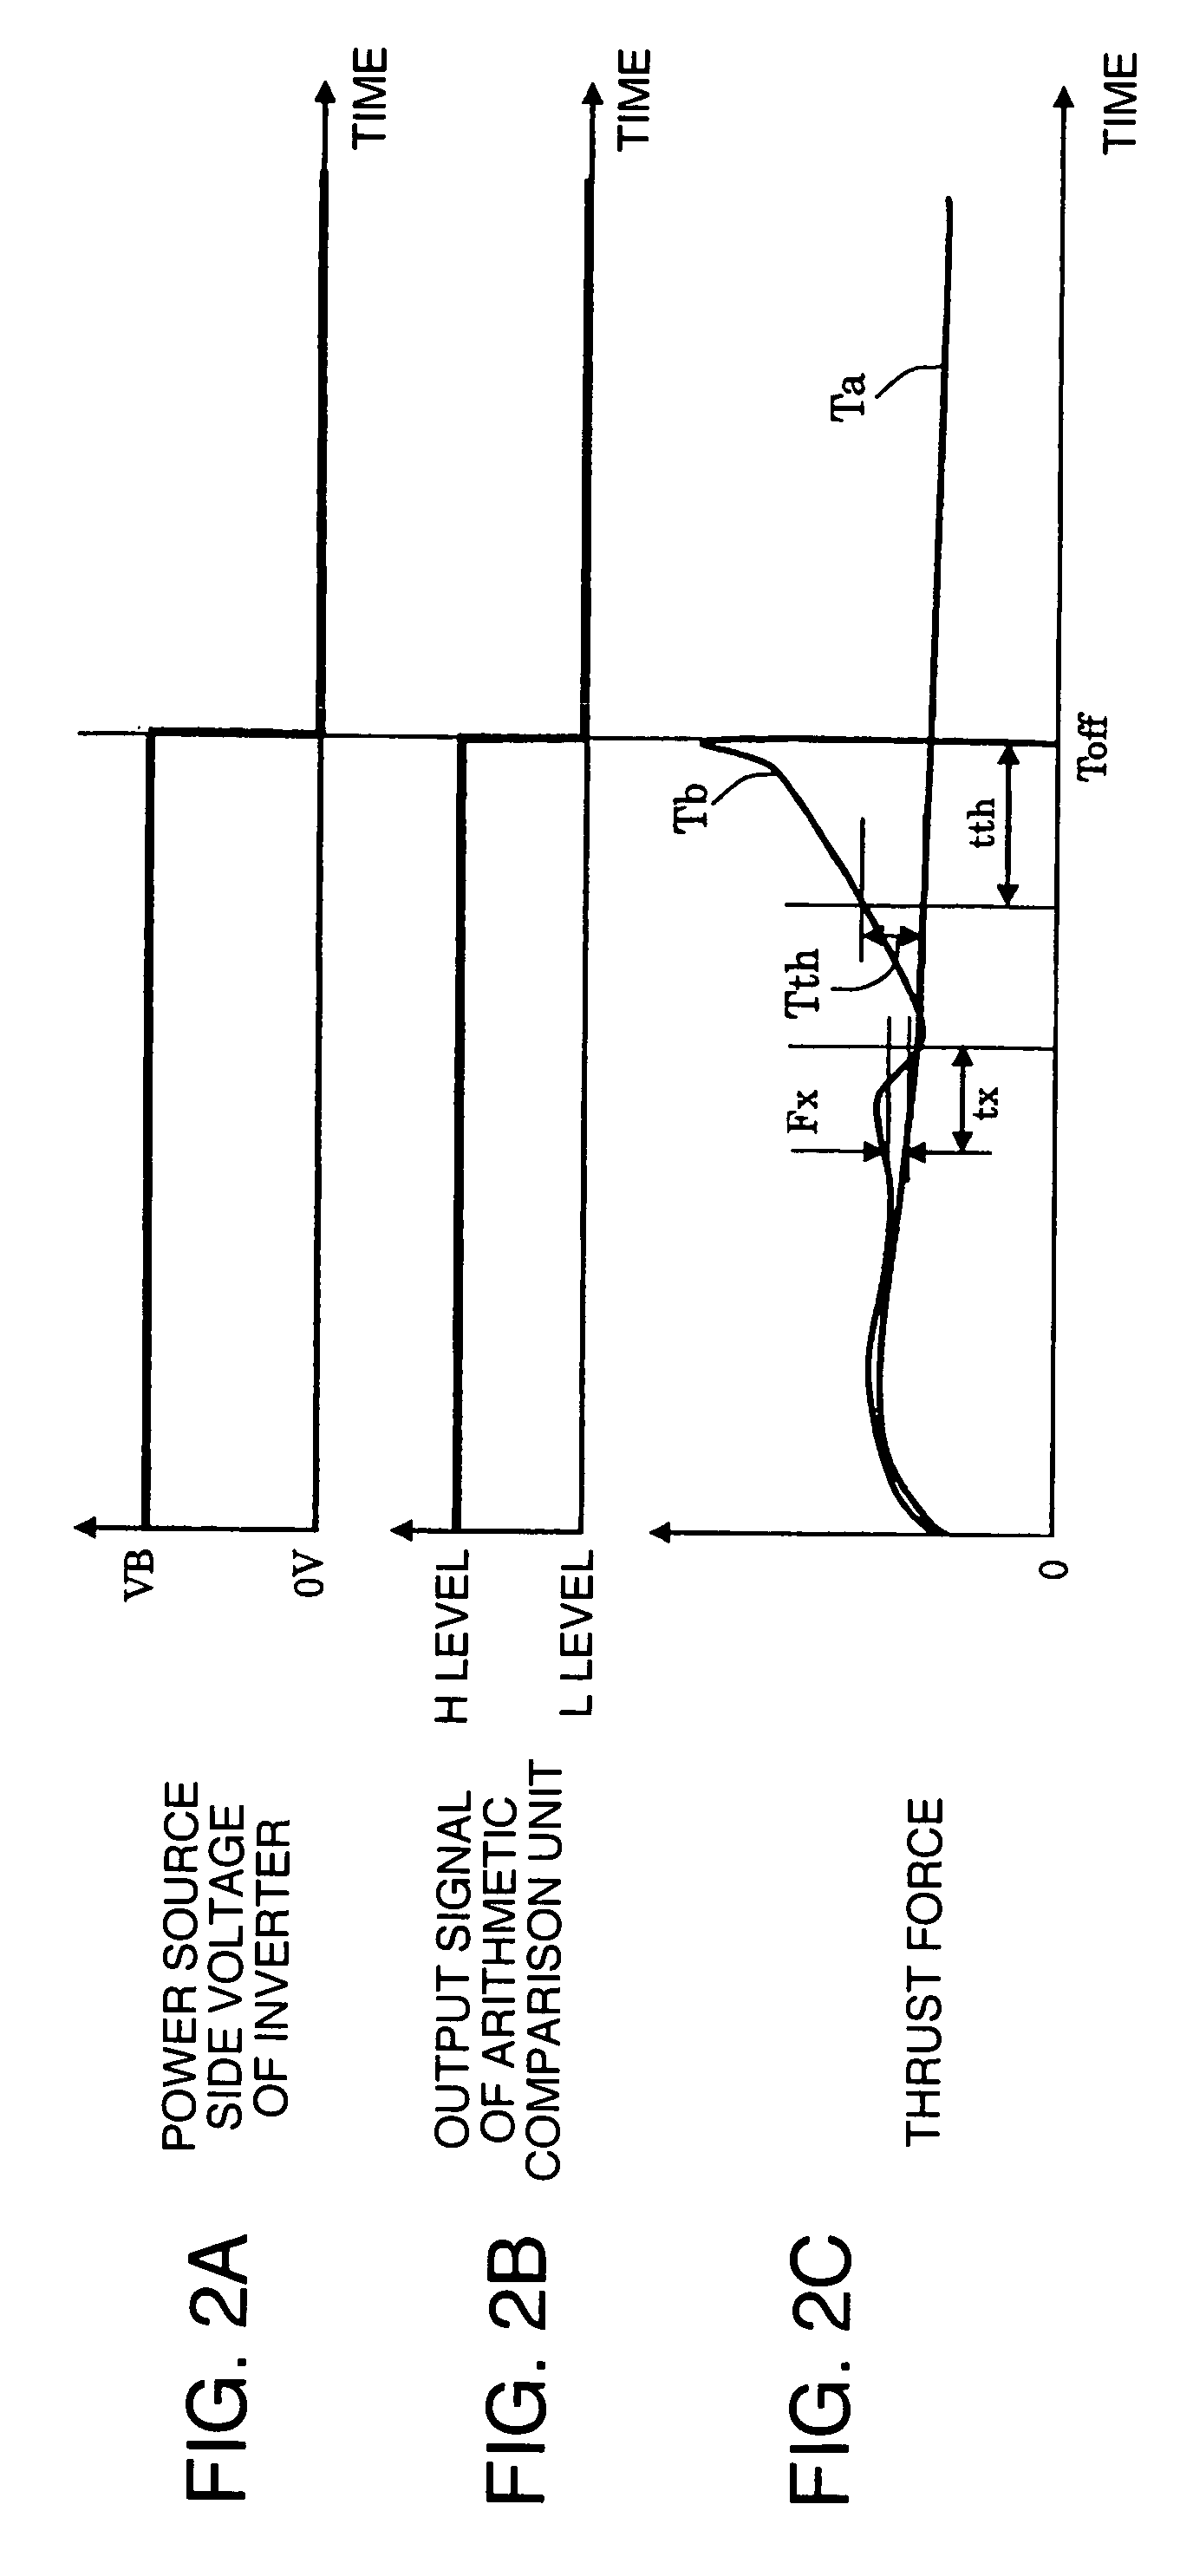 Control apparatus for electric motor of inverter system and control apparatus for electro mechanical brake